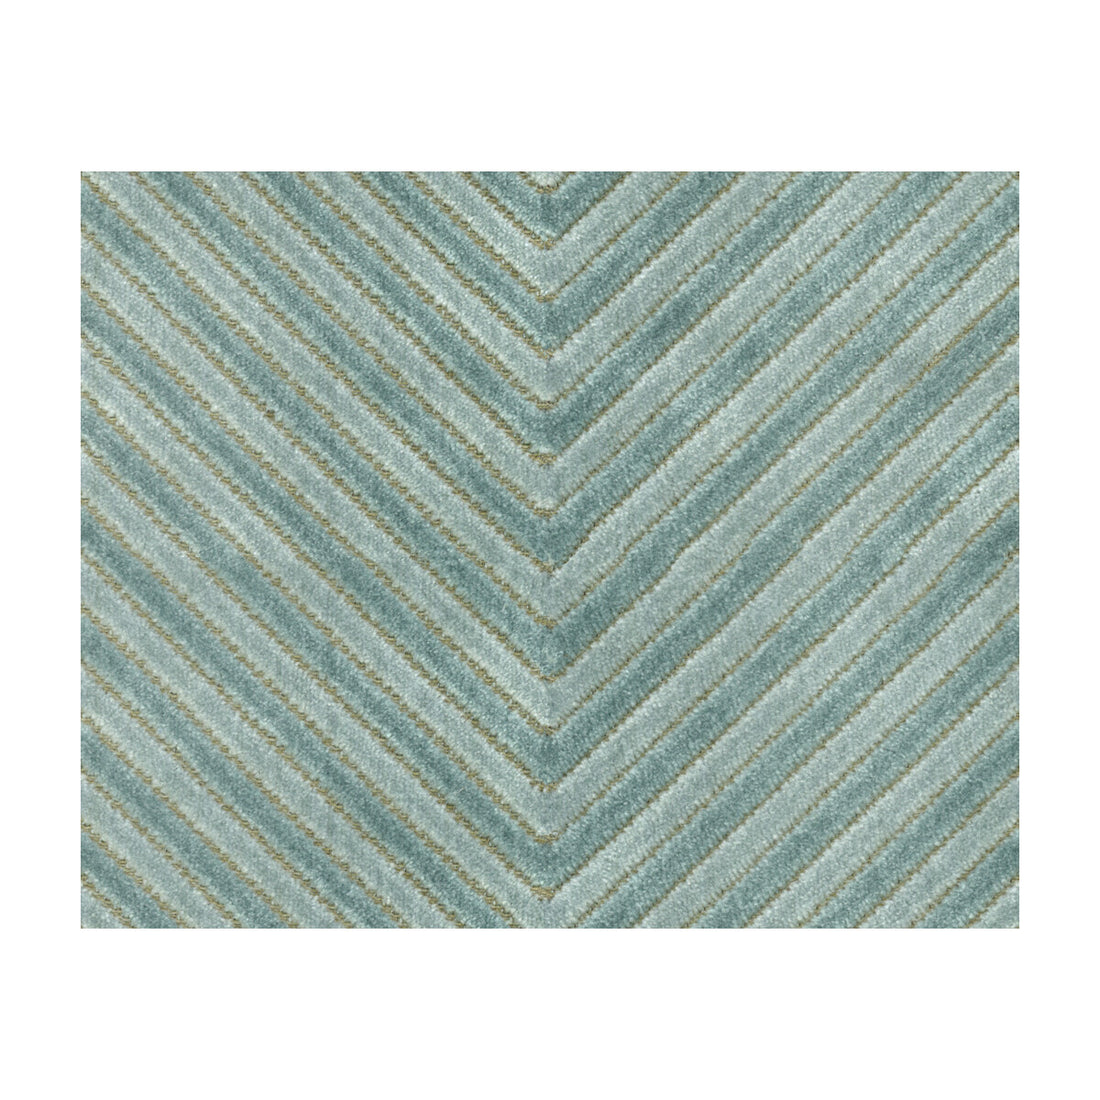 Zigandzag fabric in aqua color - pattern 34272.35.0 - by Kravet Basics in the Sarah Richardson Harmony collection